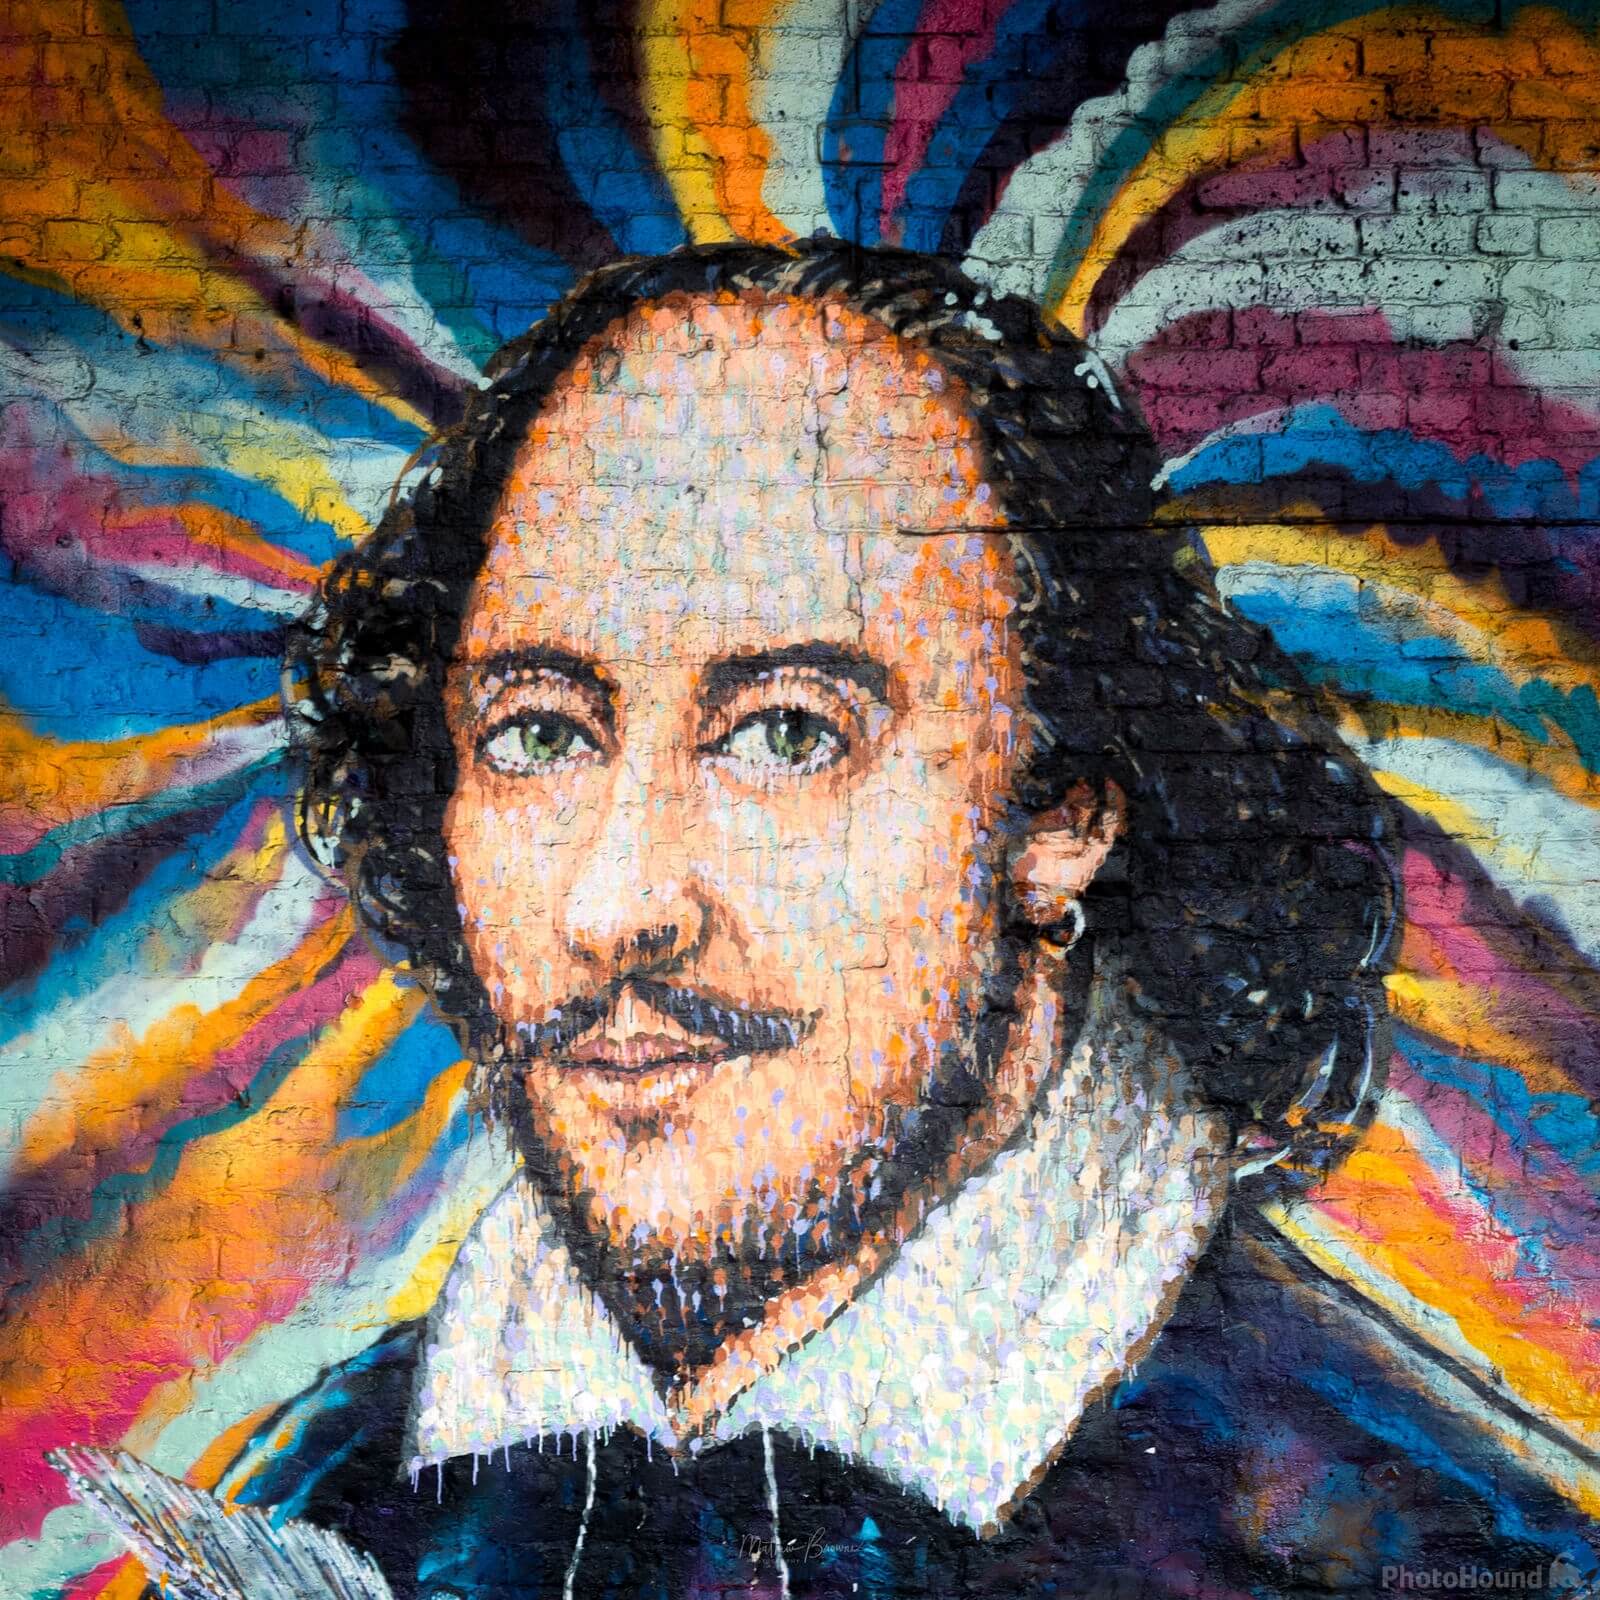 Image of Shakespeare Mural by Mathew Browne